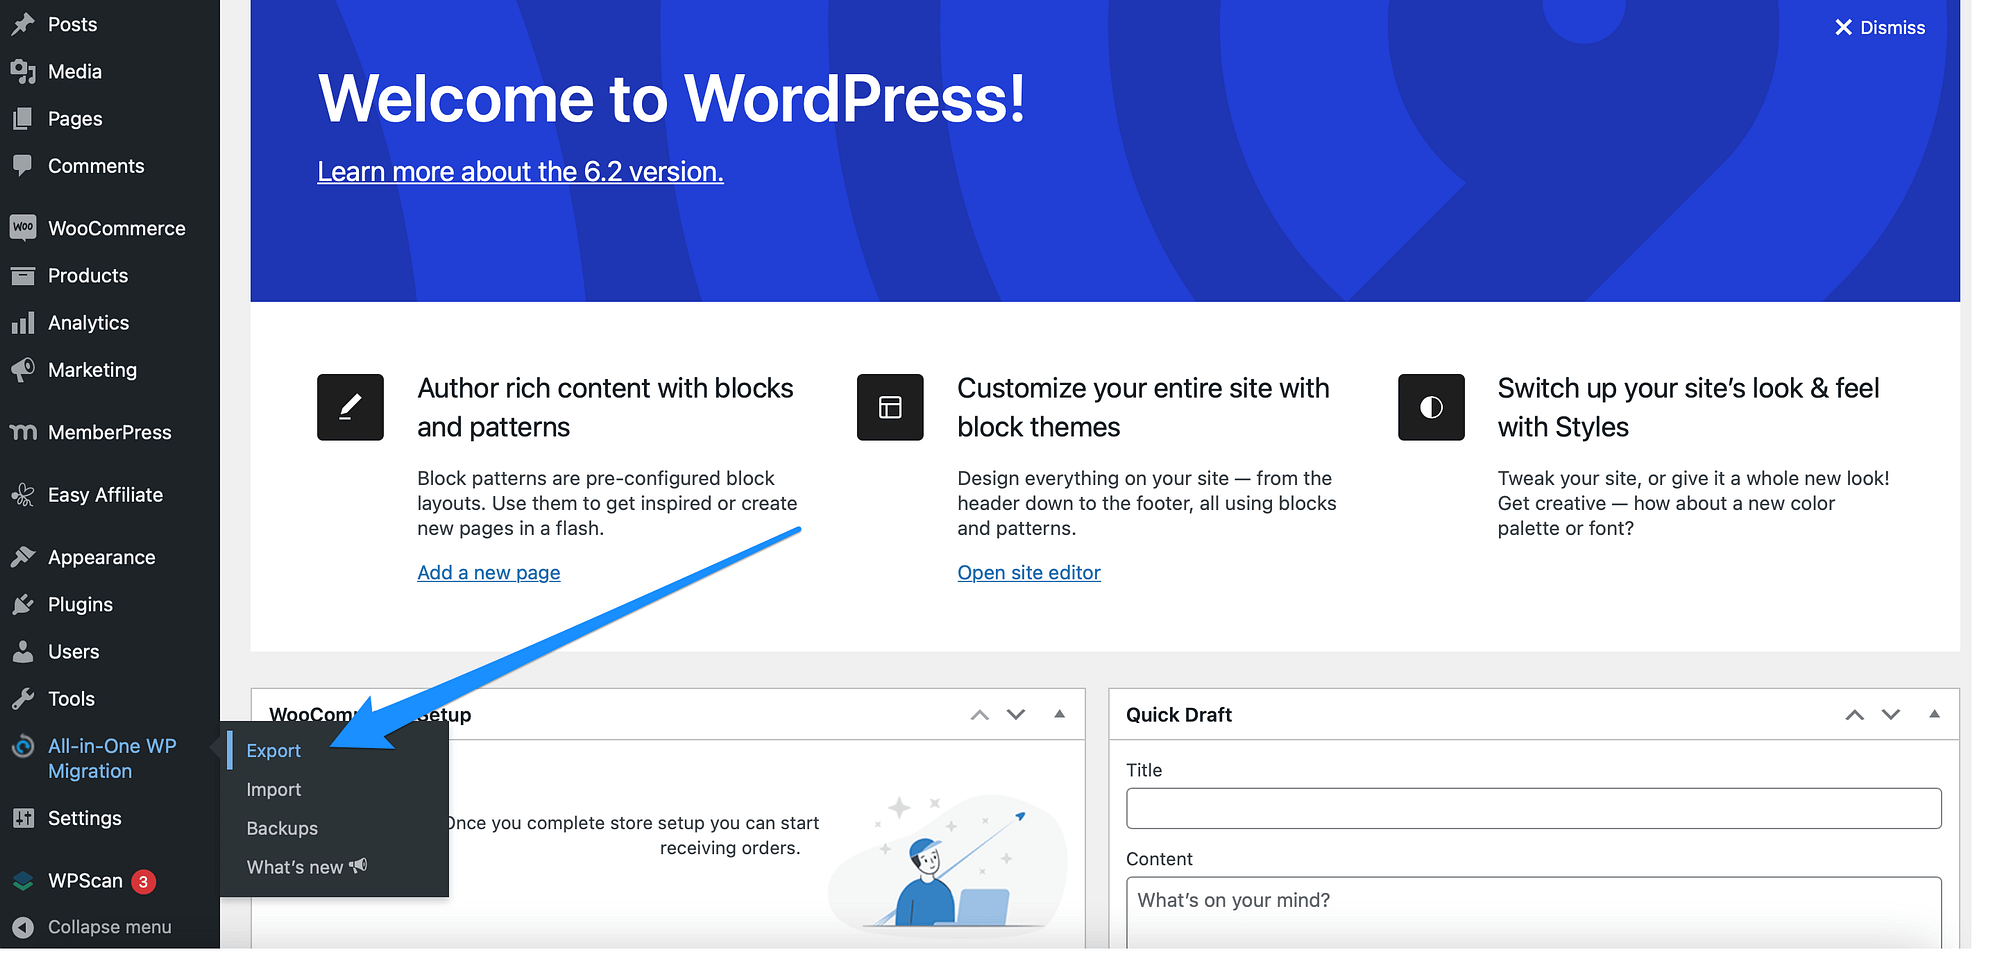 Export your WordPress website with the All-in-One WP Migration plugin.